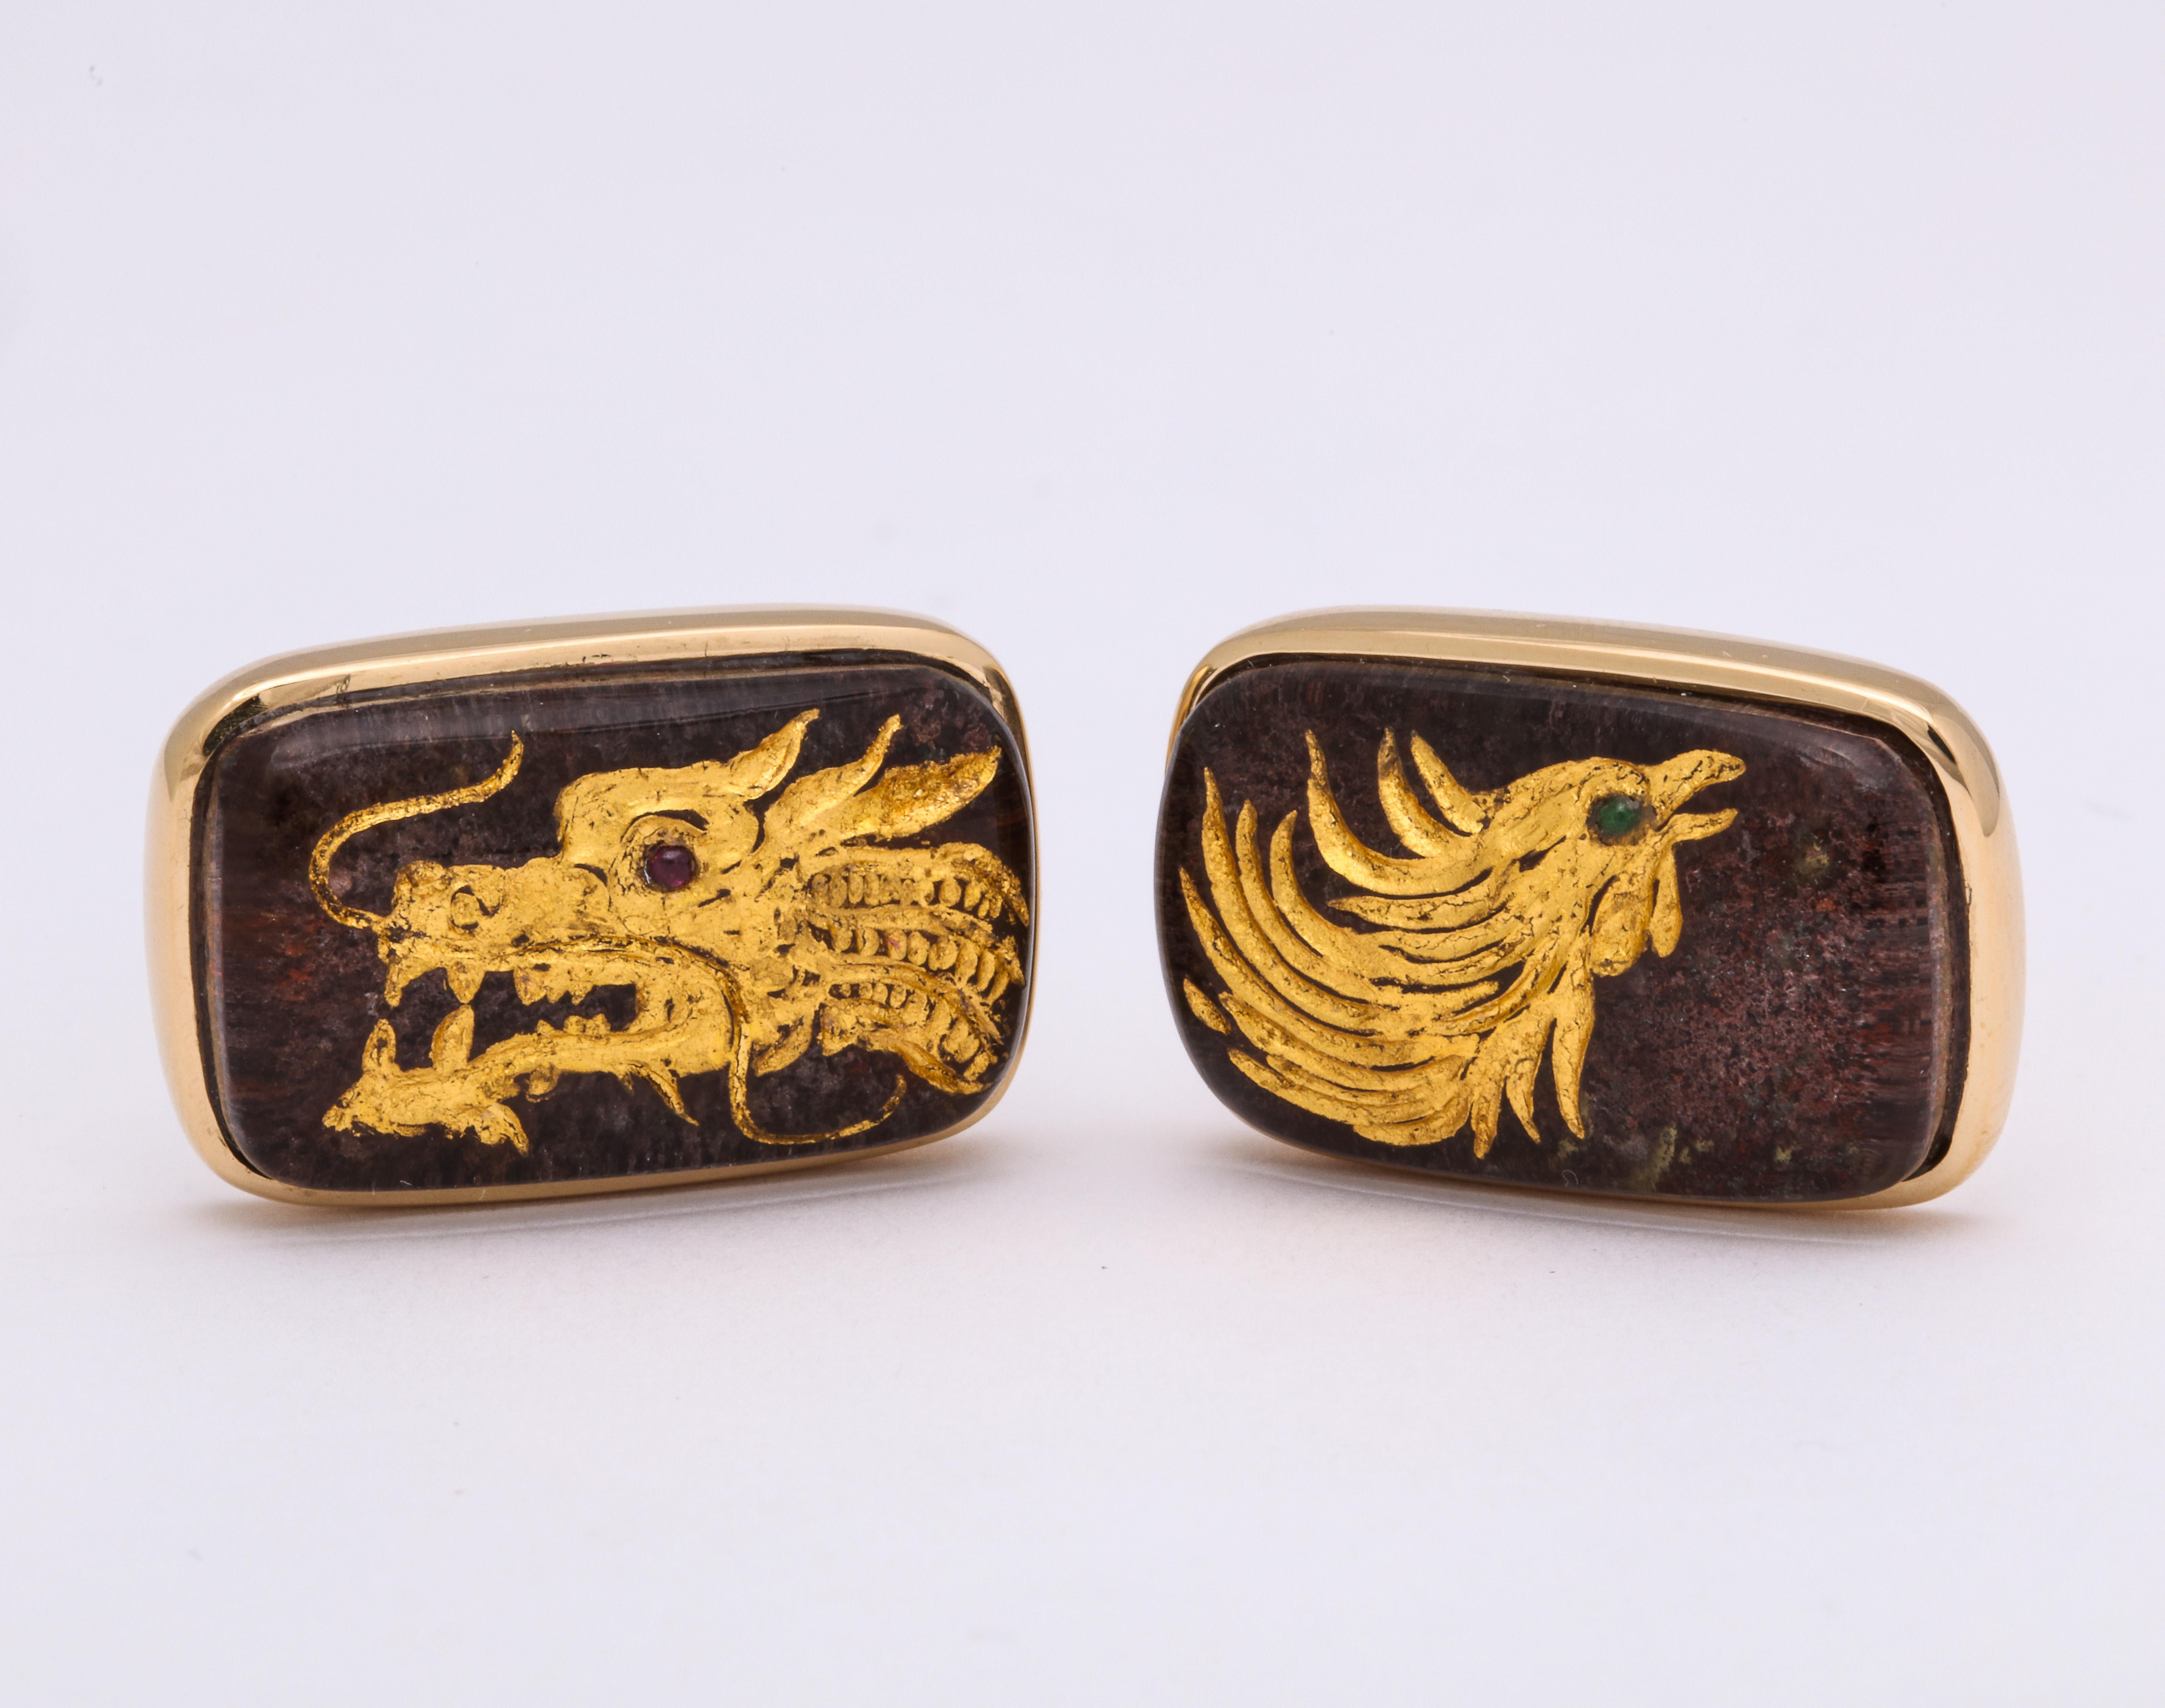 The dragon and phoenix are the most powerful yin yang couple representing a happy marriage.  As symbols of success and harmony, they appear in everything from the architecture of the Imperial Palace to classical art and literature.  

In this one of